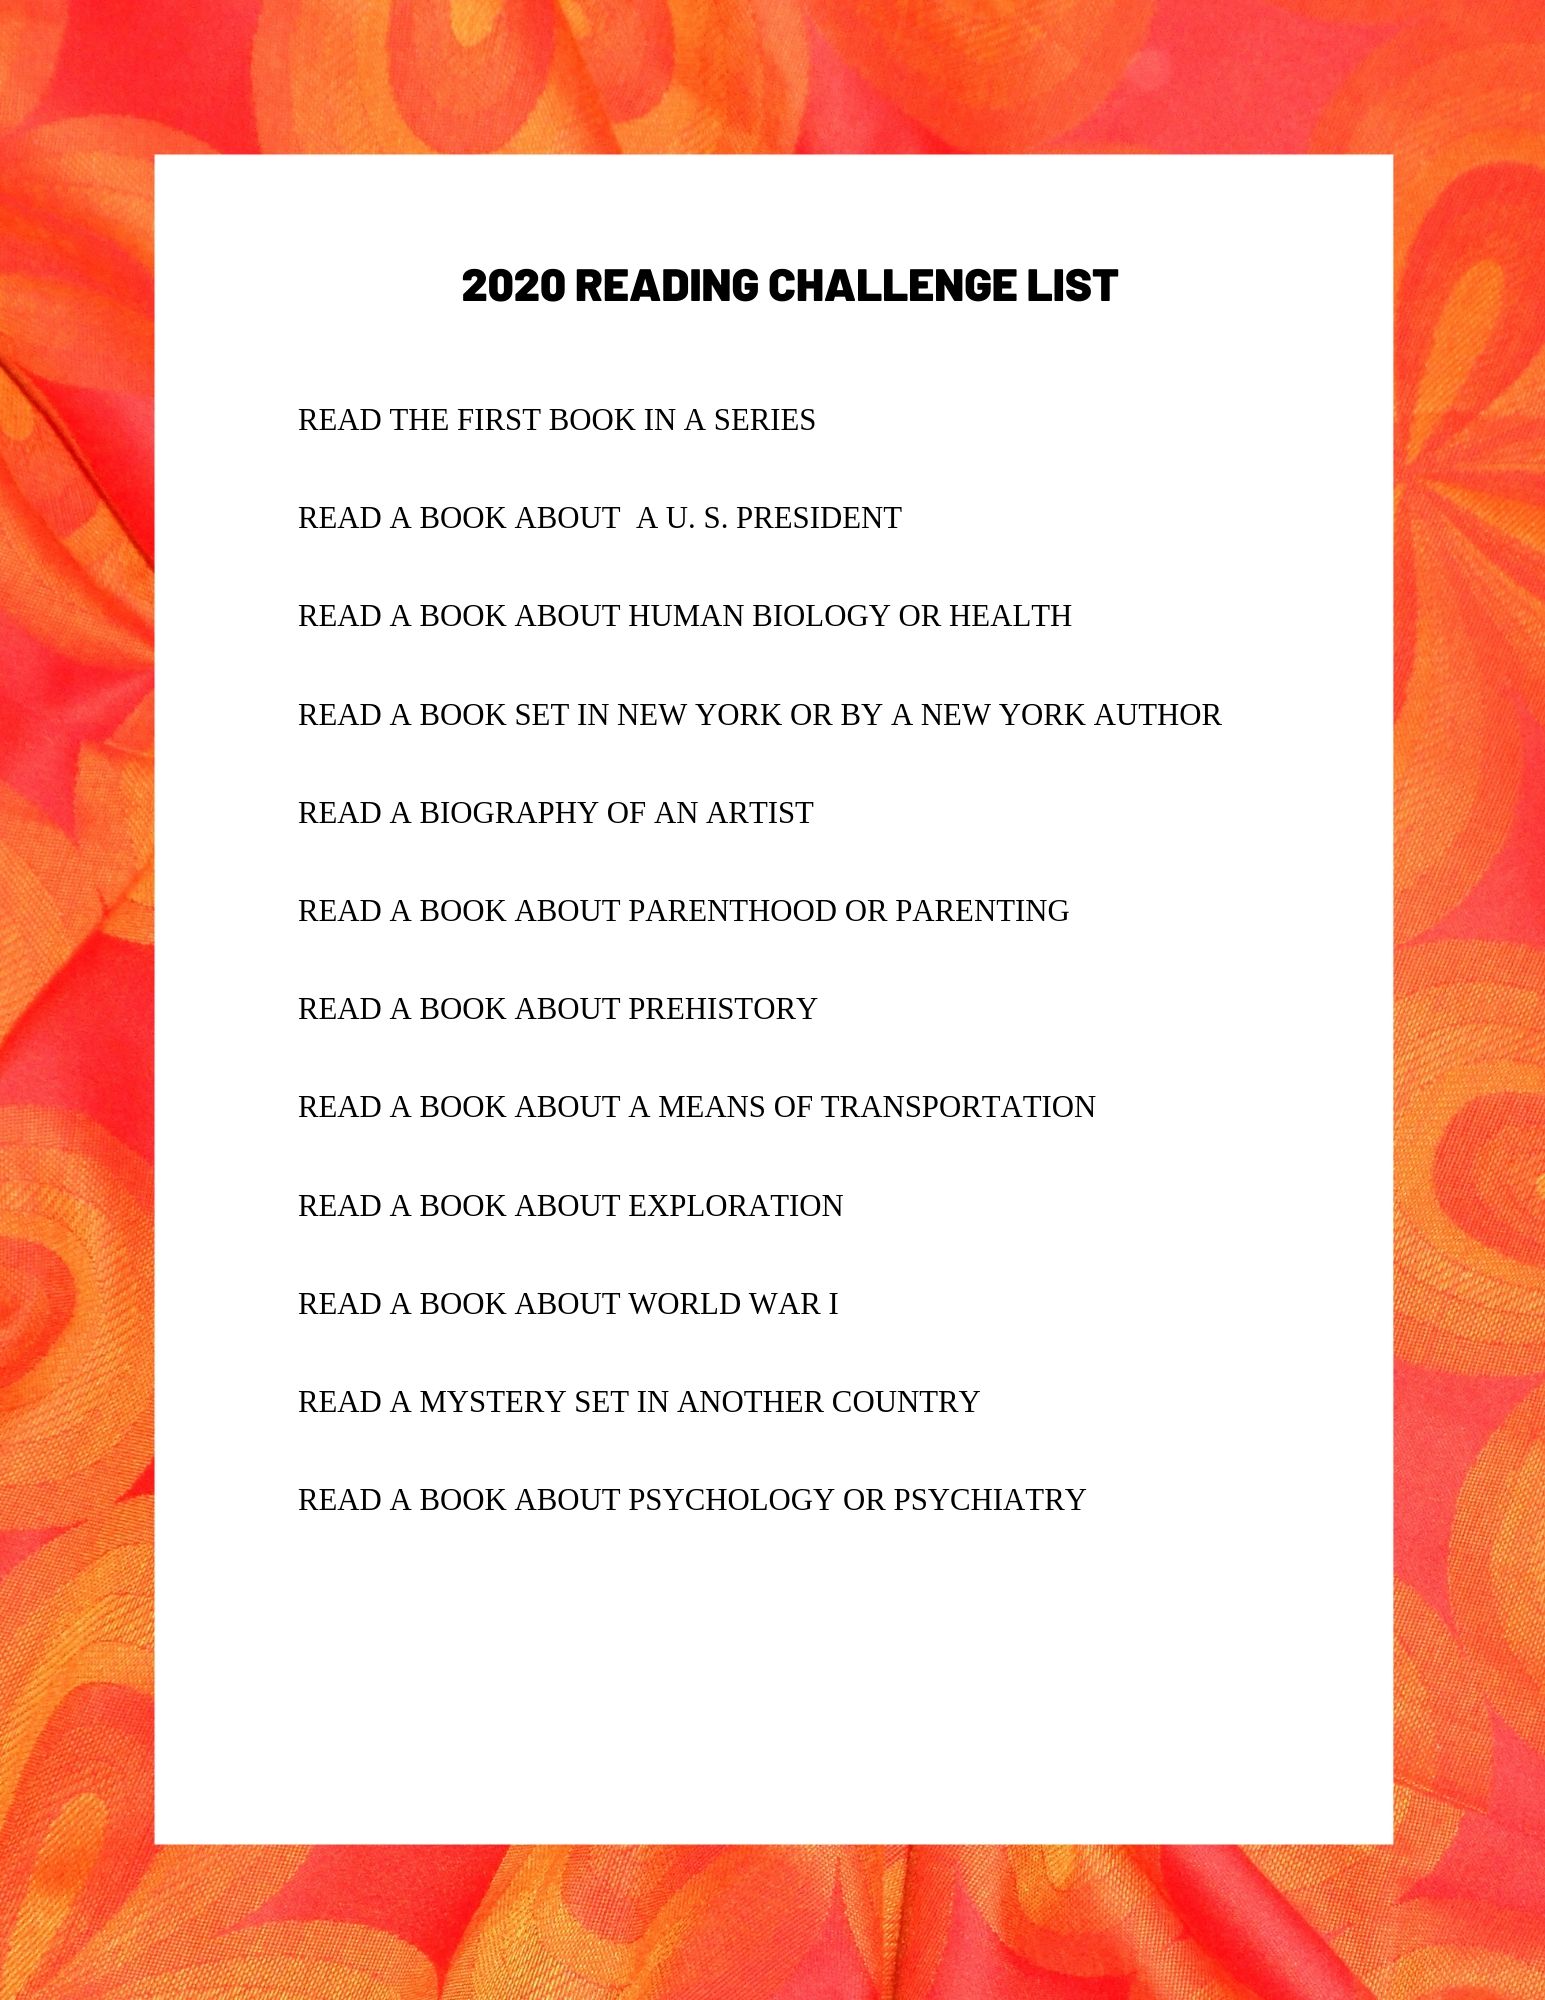 2020 READING CHALLENGE READING LIST READ THE FIRST BOOK IN A SERIES READ A BOOK ABOUT U. S. PRESIDENT (S) READ A BOOK ABOUT HUMAN BIOLOGY OR HEALTH READ A BOOK SET IN NEW YORK OR BY A NEW YORK AUTHOR READ A